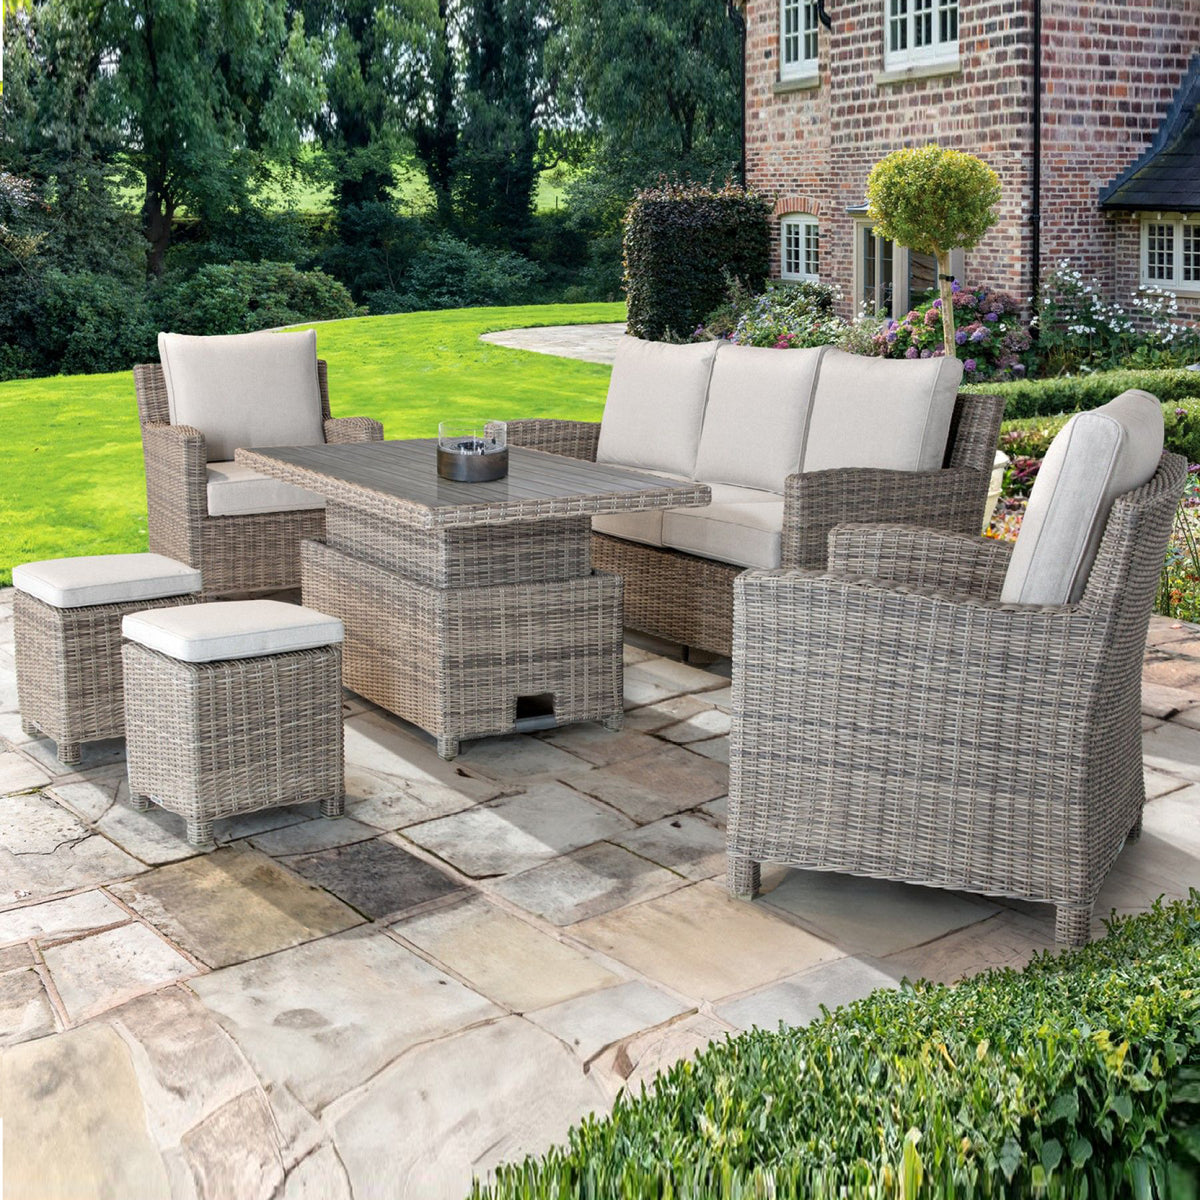 Kettler Palma Signature Oyster Wicker Outdoor Lounge Sofa Set with High Low Slat Top Table